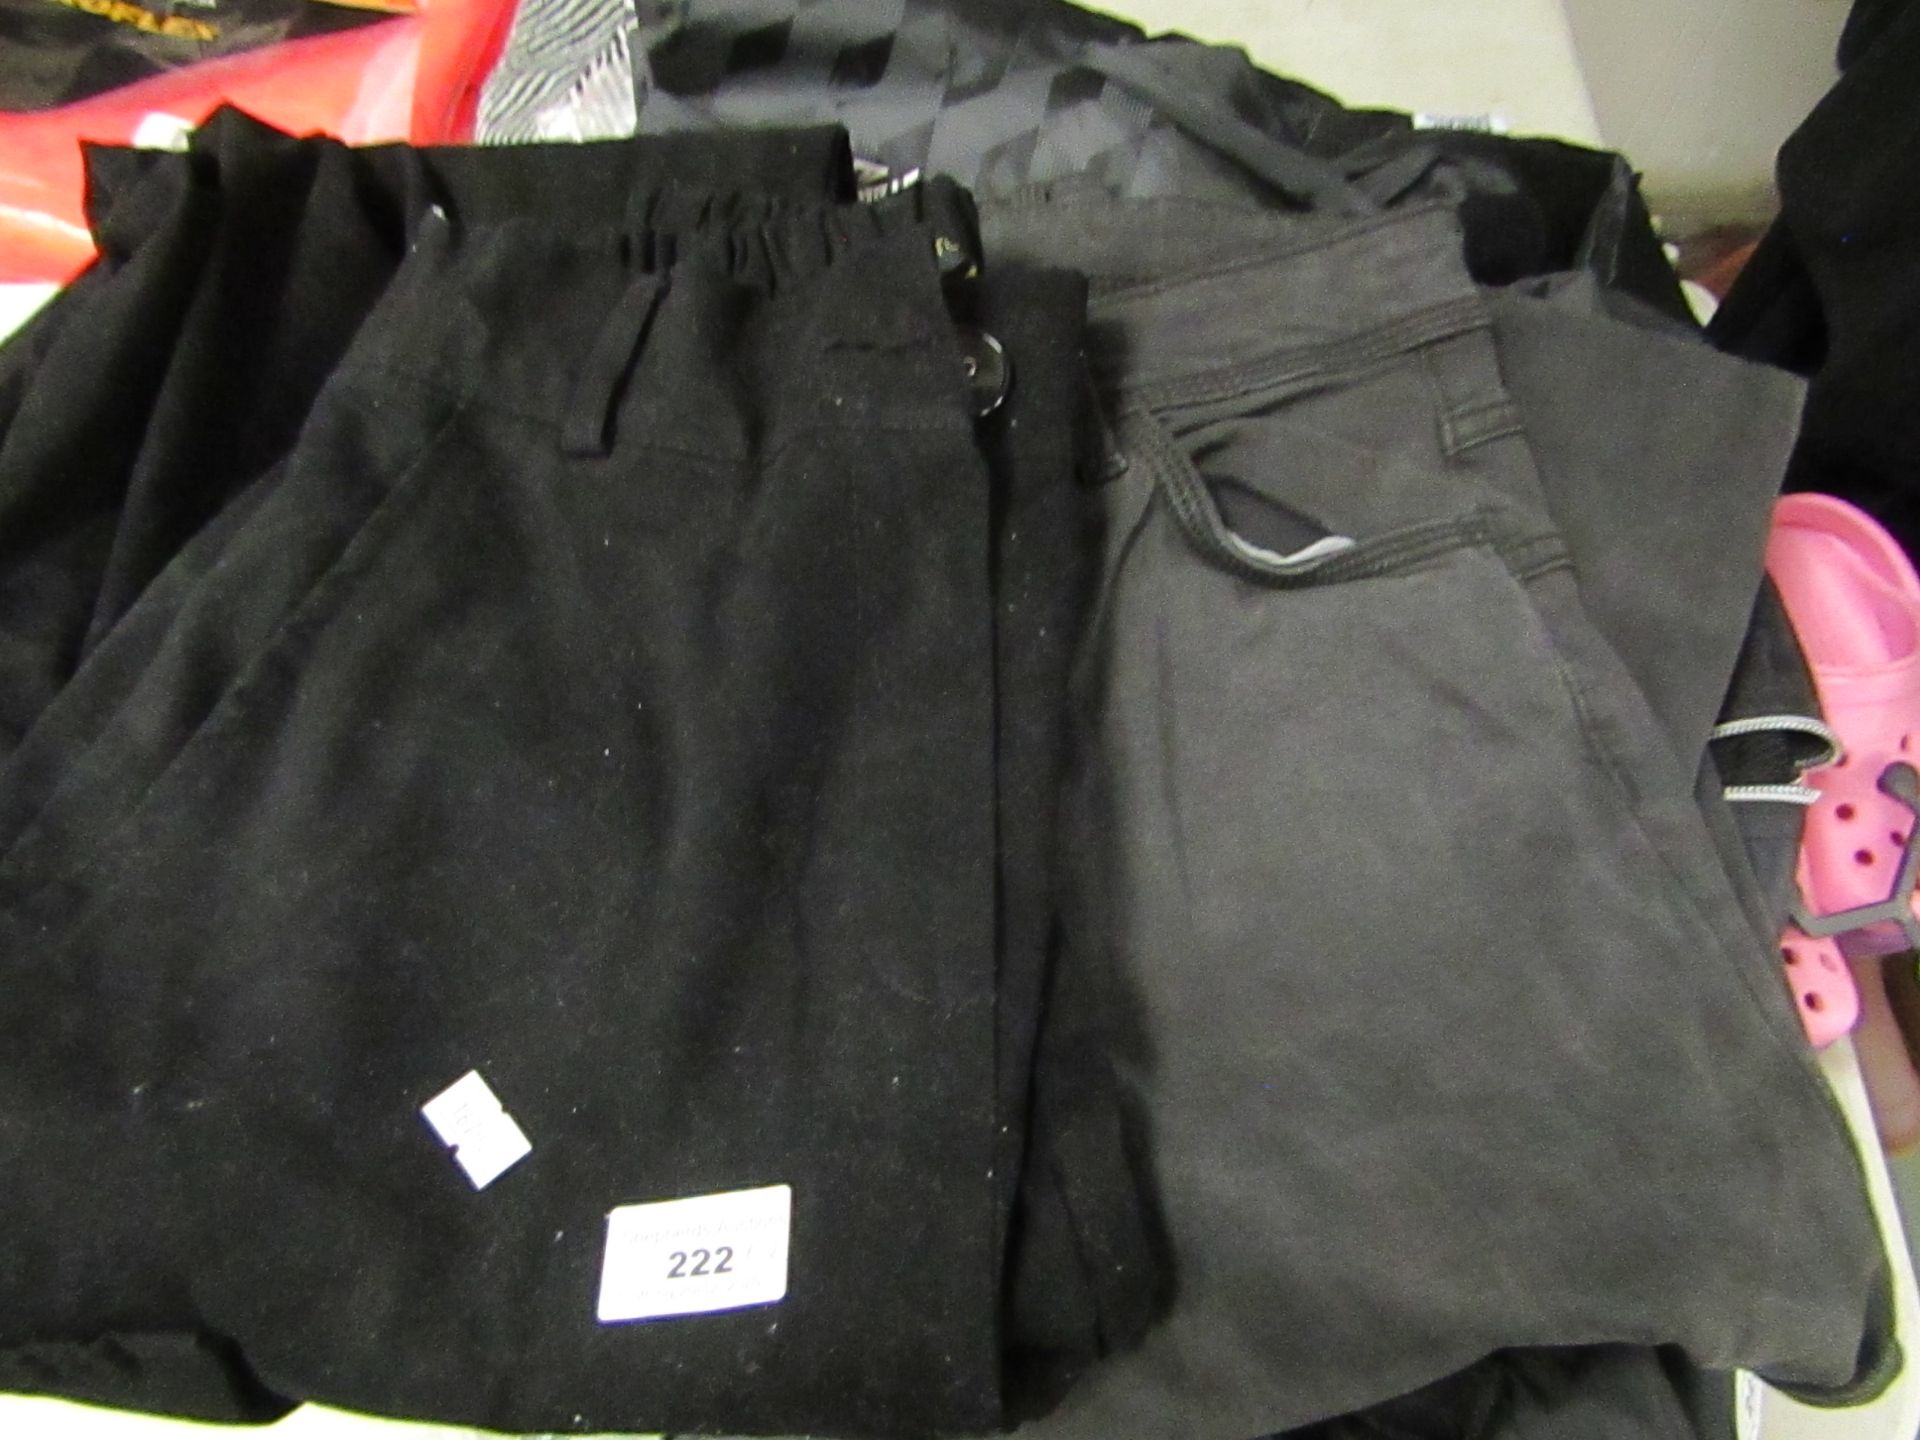 2 X Pairs of Pants Both Size 42 Shop Soiled